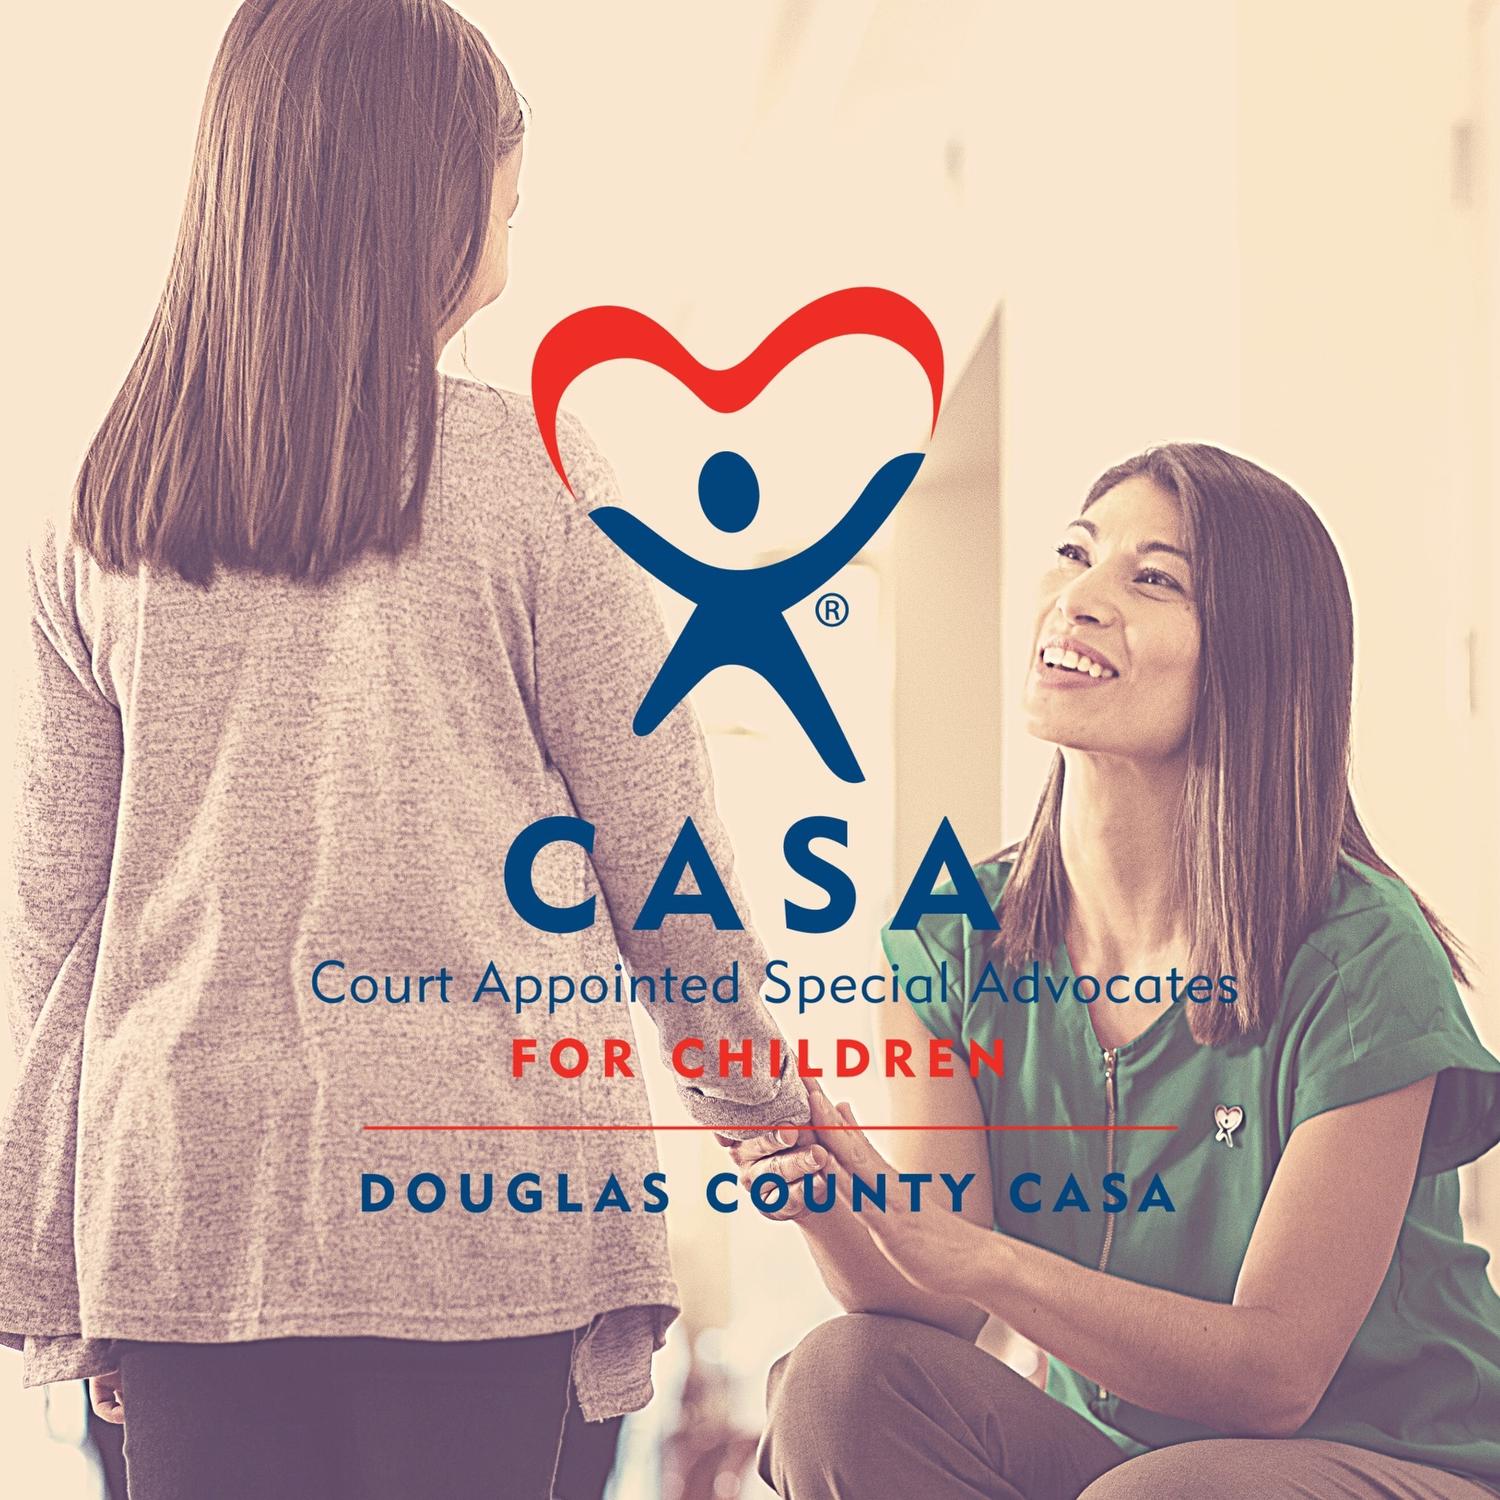 Woman holding child's hand and CASA logo